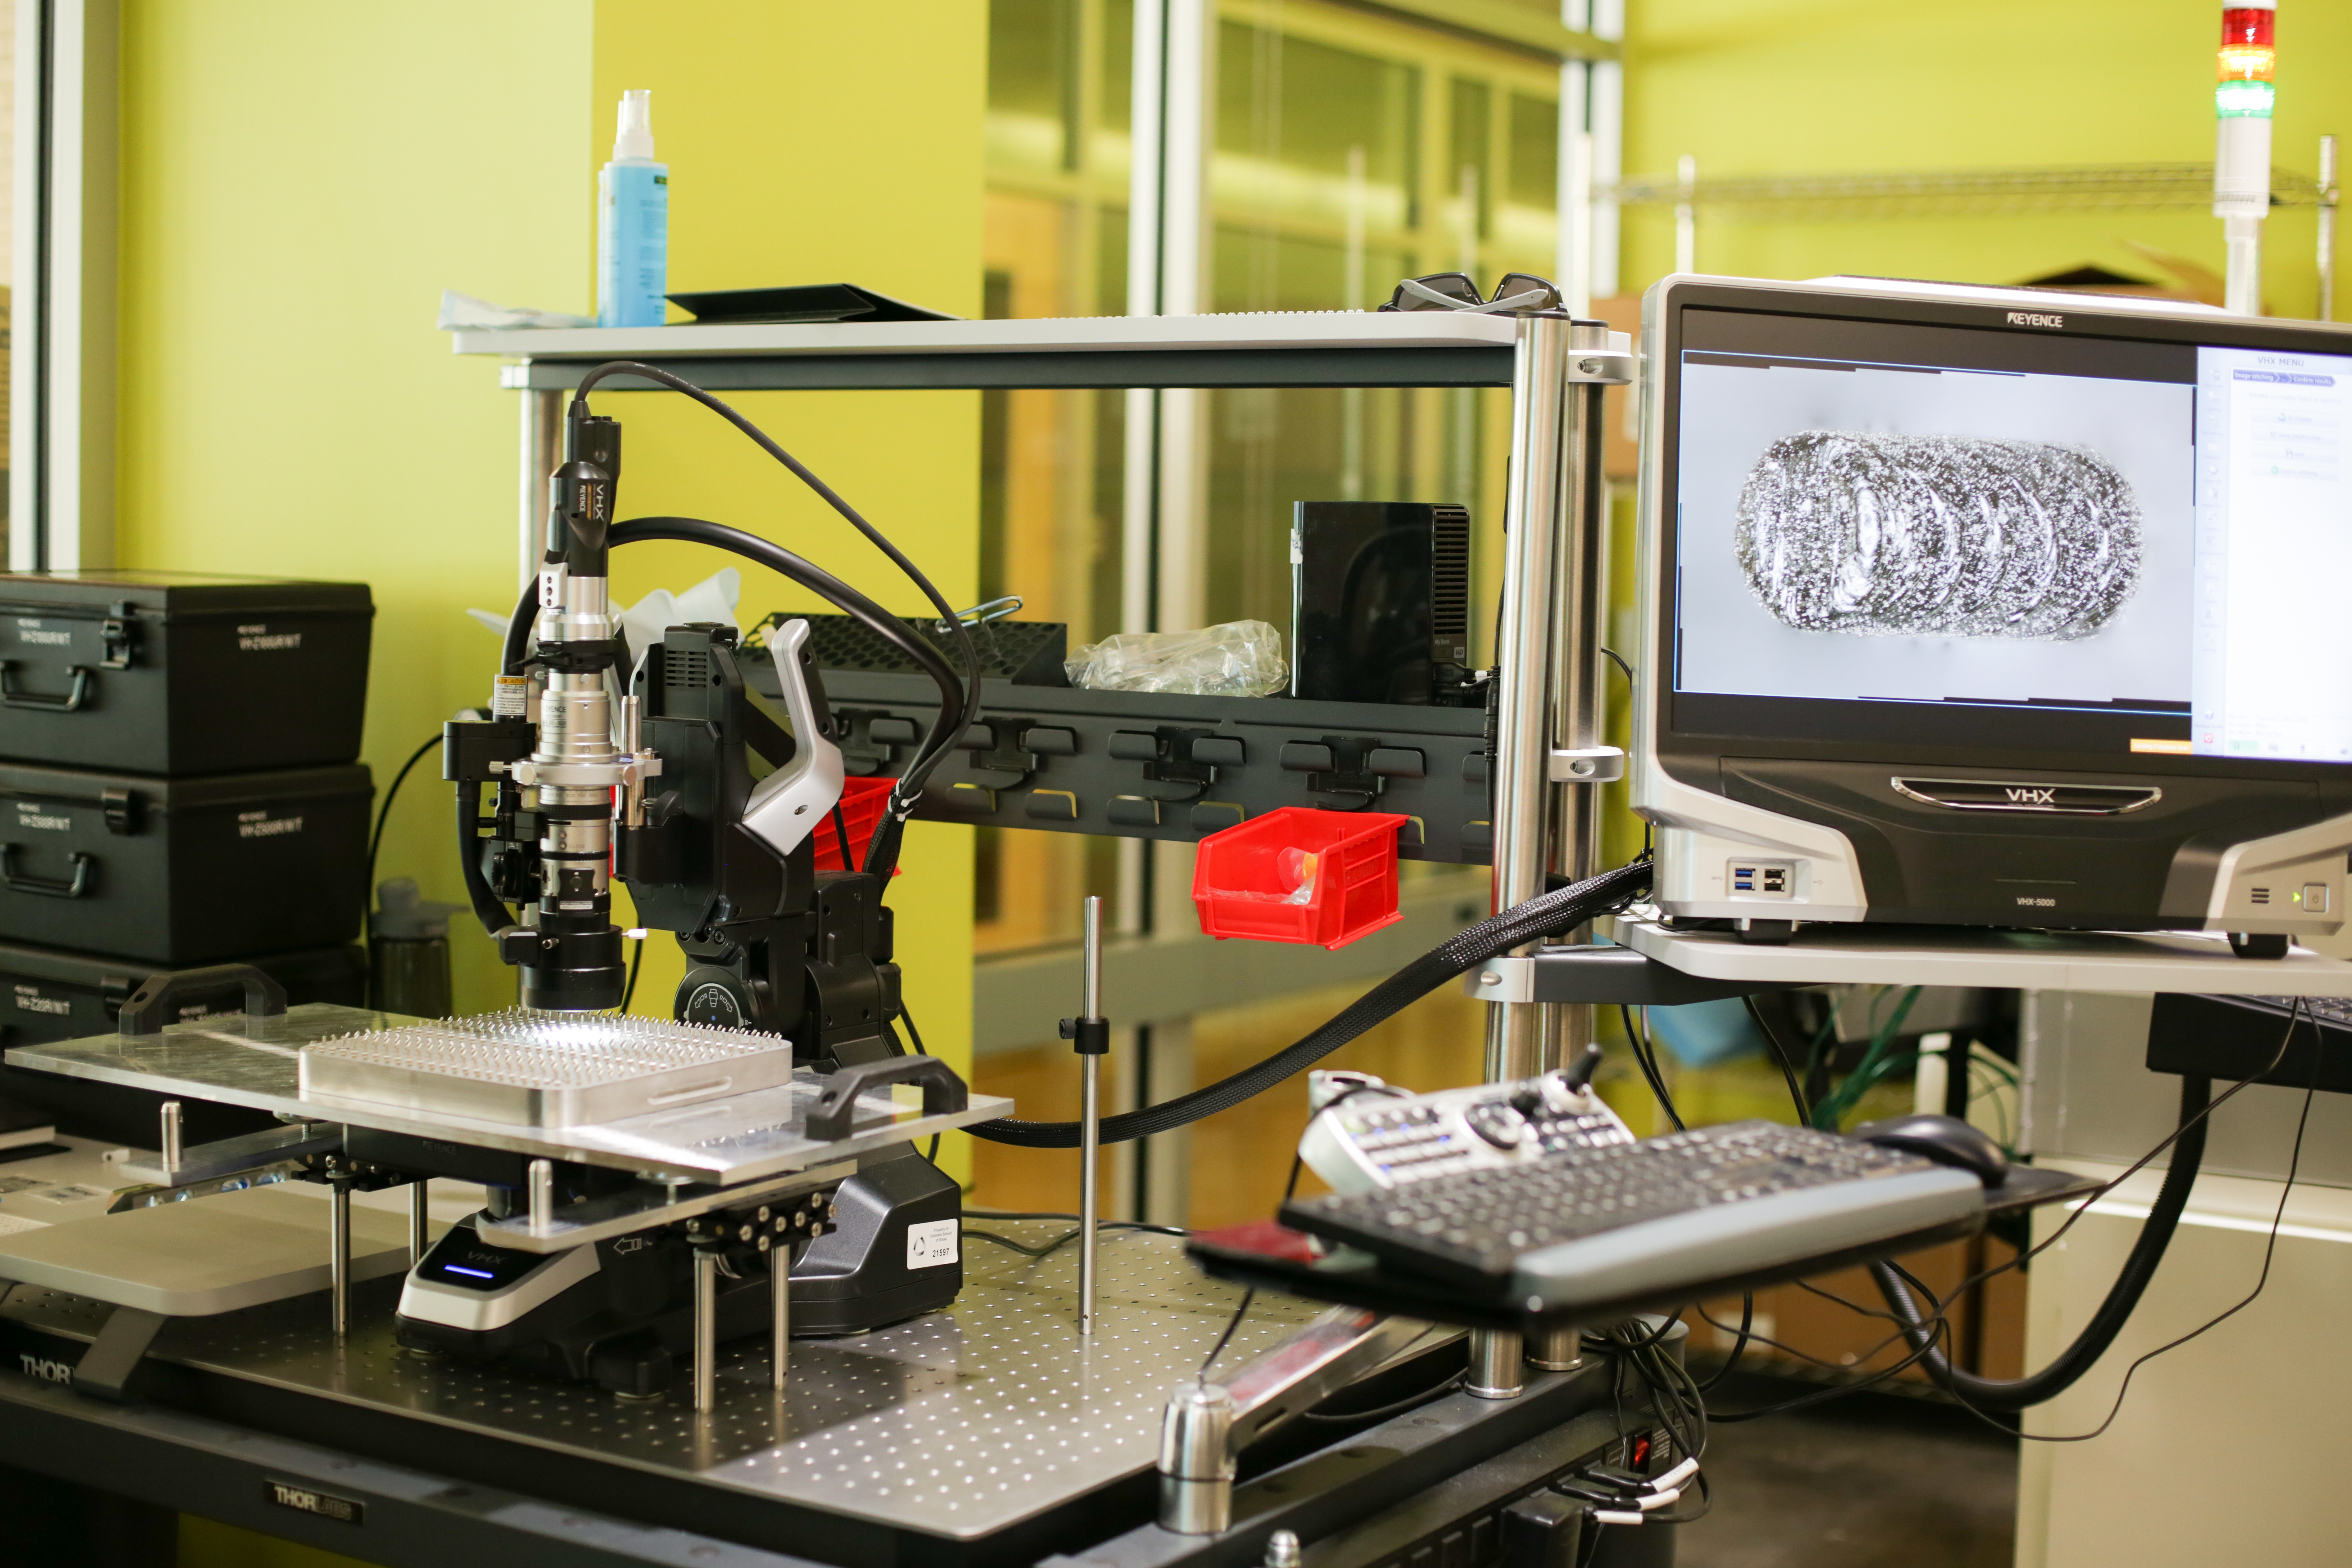 Image of machinery used by ADAPT consortium